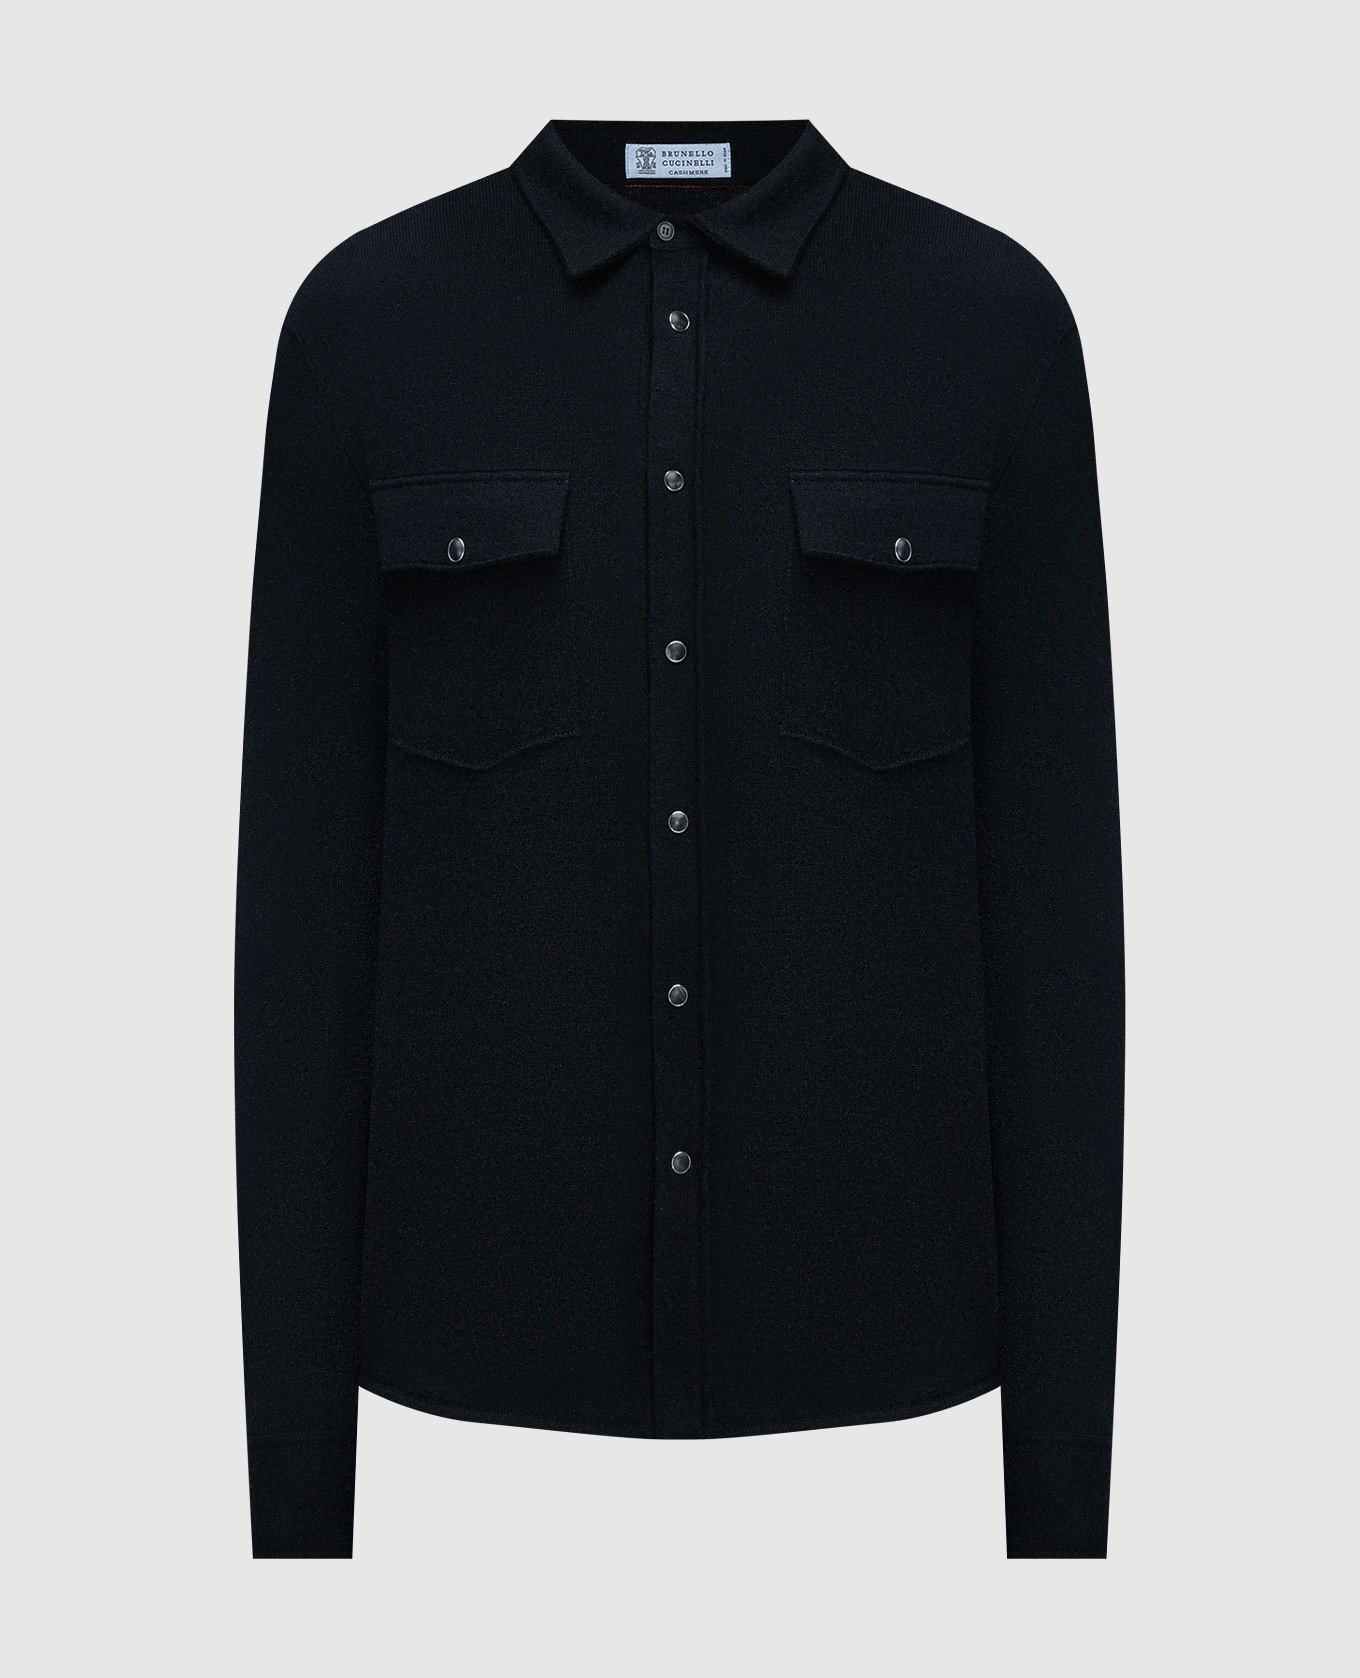 Black shirt made of wool, cashmere and silk